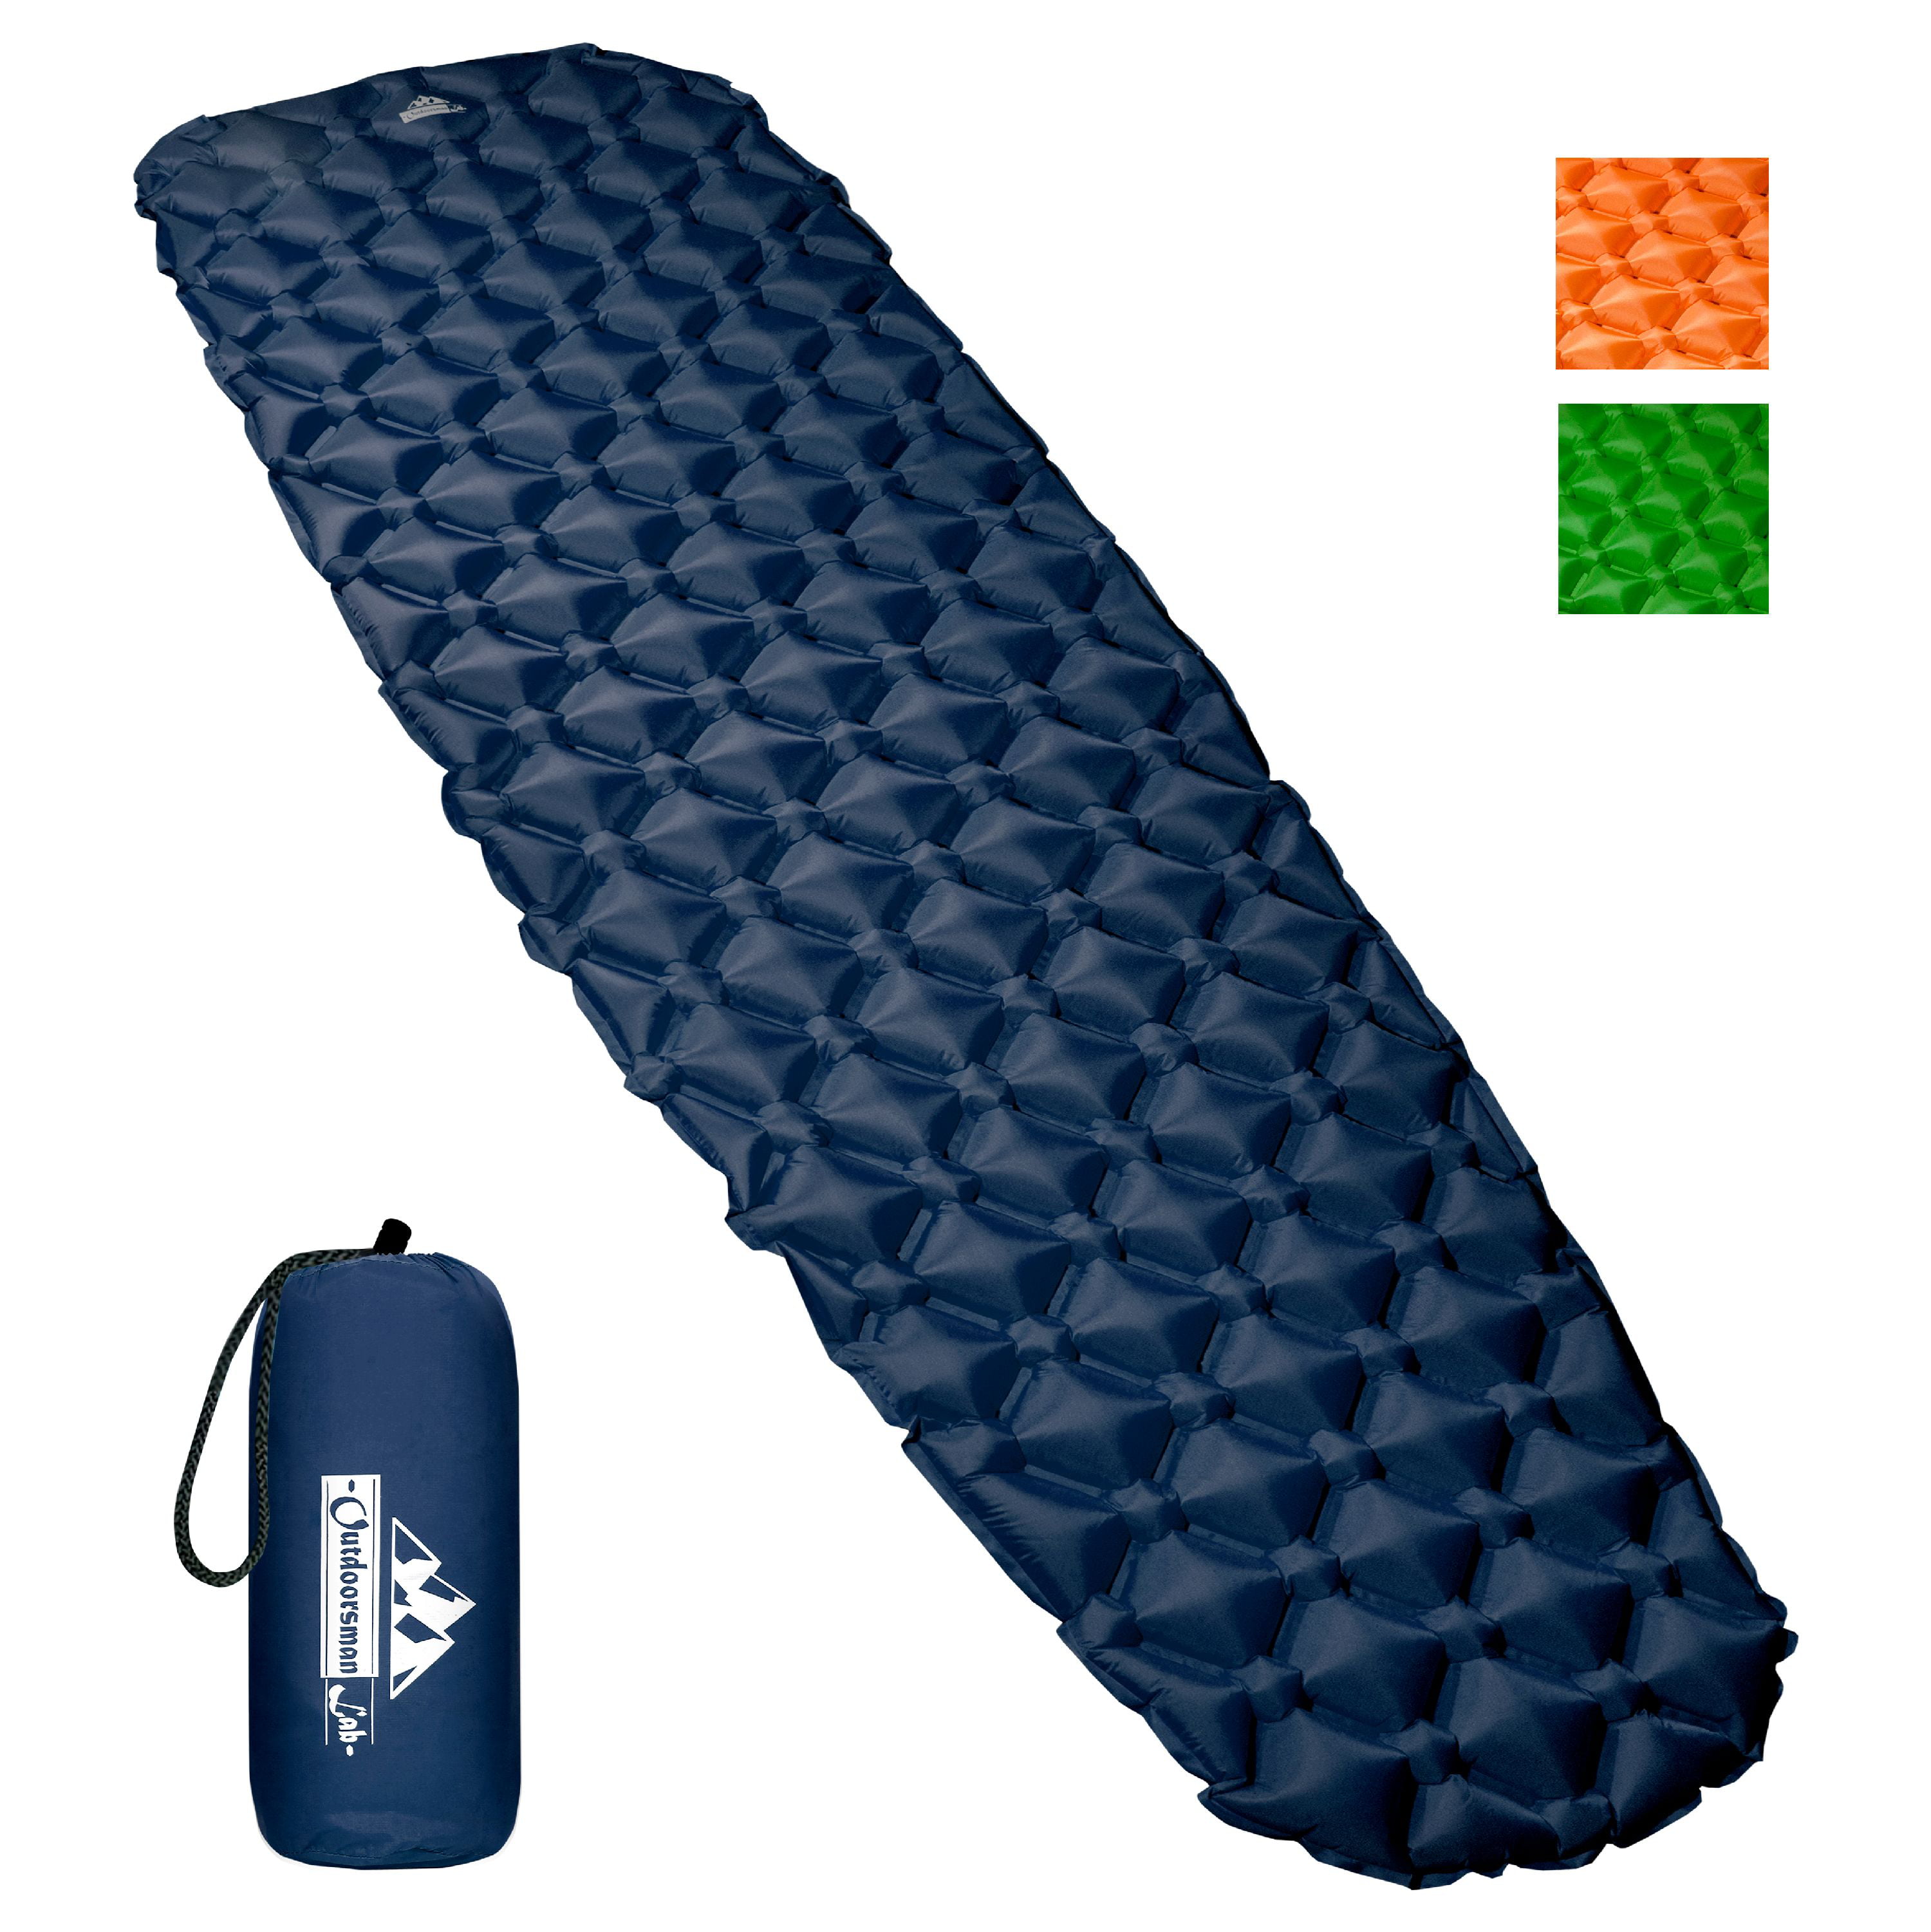 Outdoorsmanlab Camping Hiking Ultralight Sleeping Pad Ultra-Compact For Backpack 